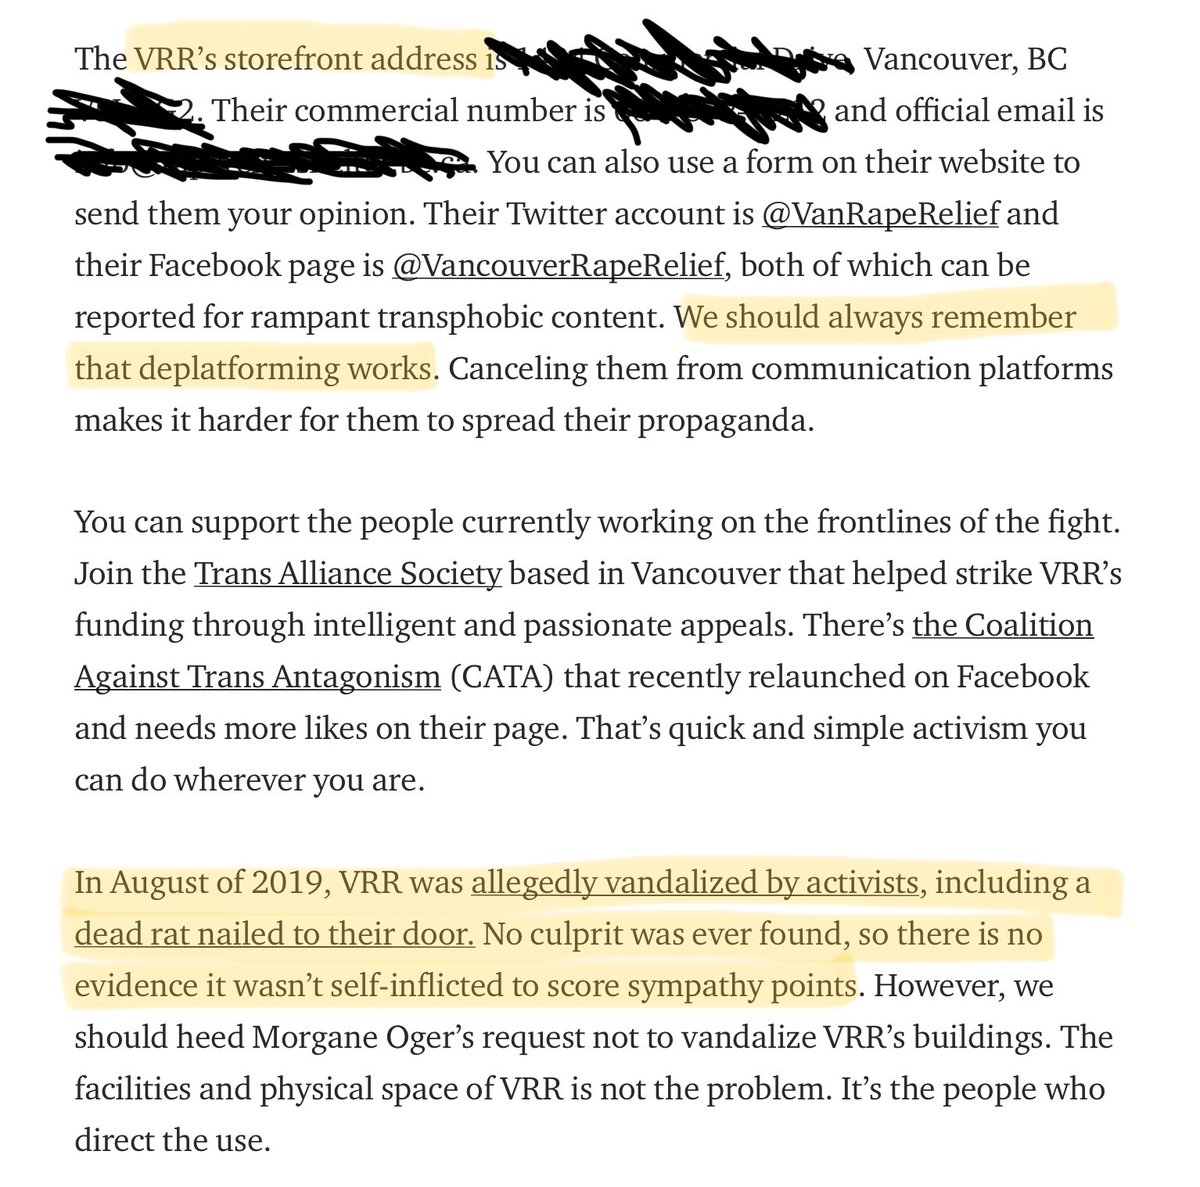 “The VRR’s storefront address is [redacted], Vancouver, BC….”“In August of 2019, VRR was… vandalized…, including a dead rat nailed to their door. … there is no evidence it wasn’t self-inflicted to score sympathy points.”“[A]lways remember that deplatforming works.”